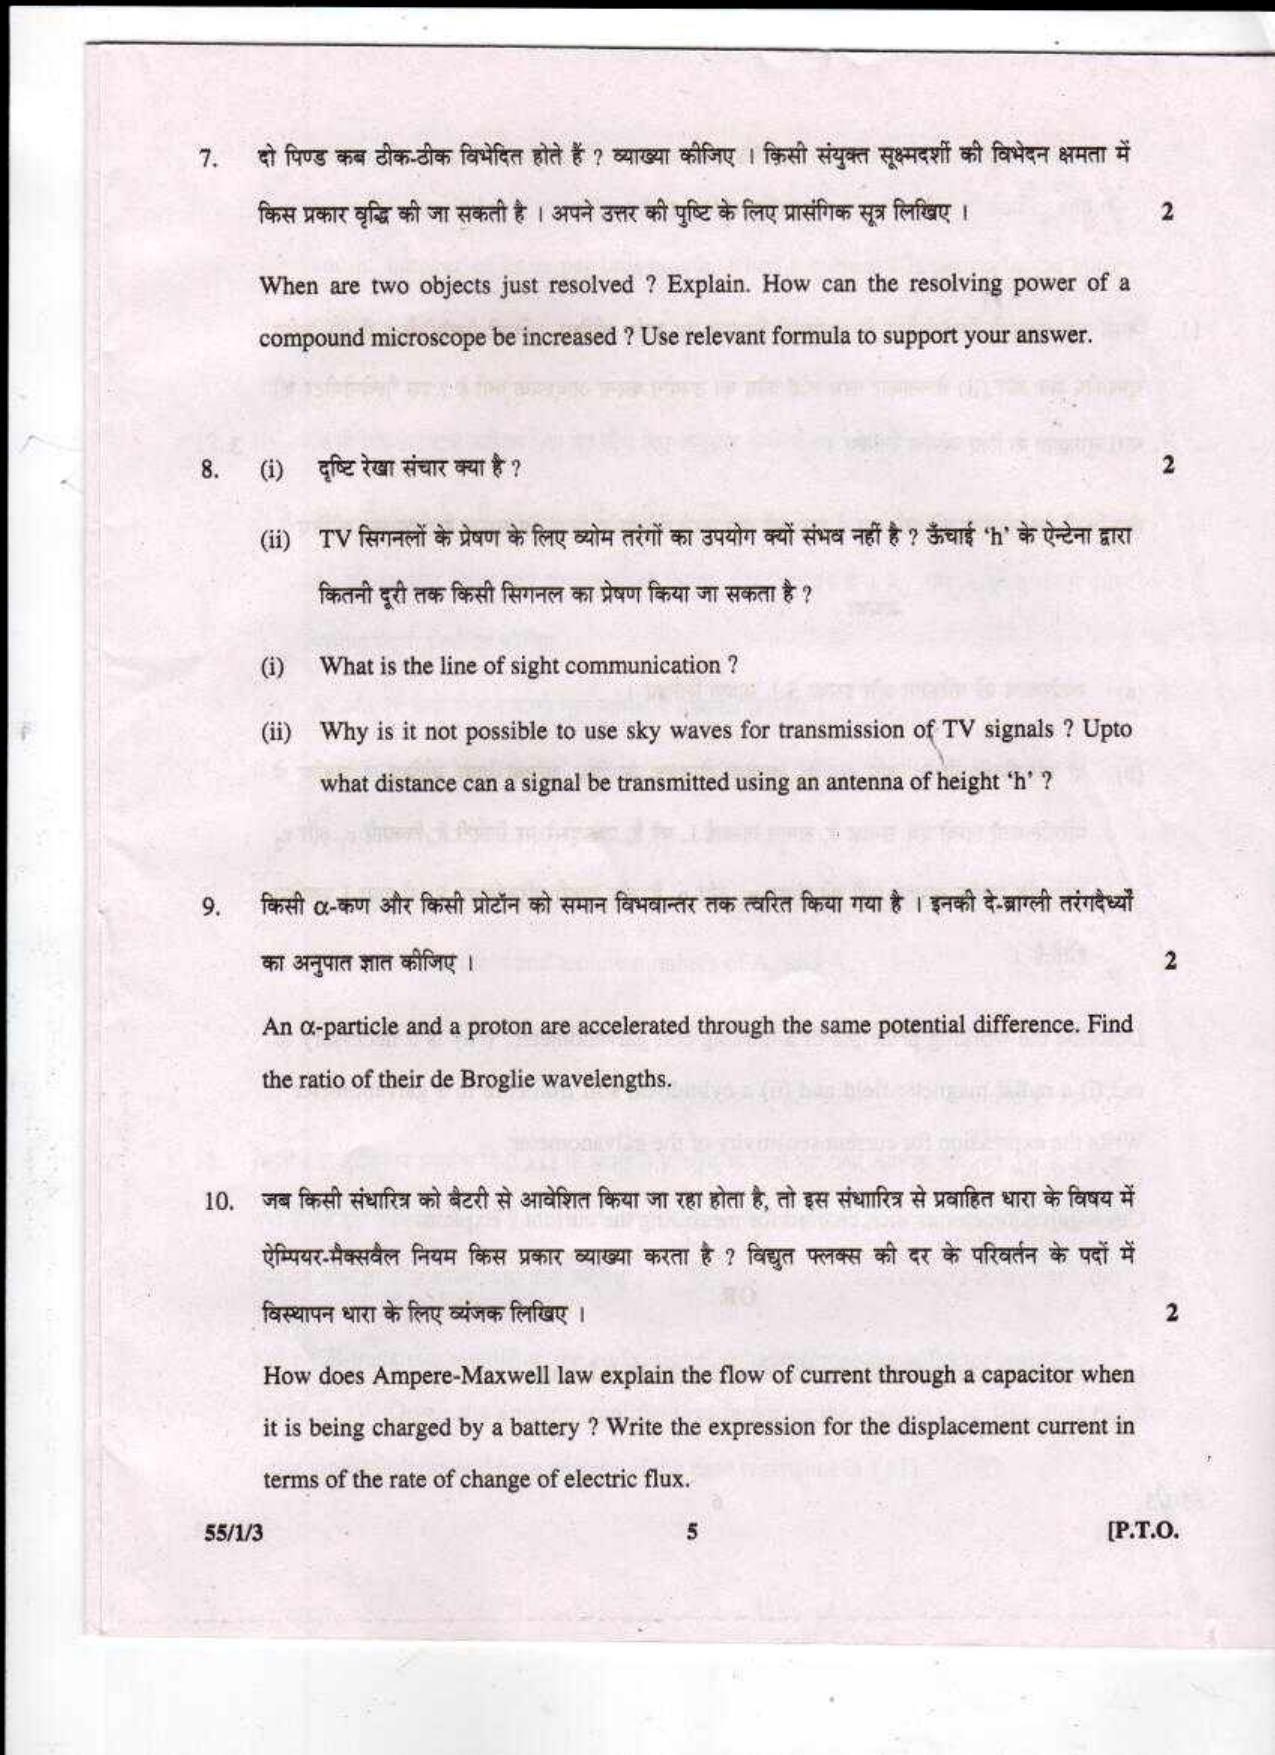 CBSE Class 12 Physics (Theory) SET 3-Delhi-12 2017 Question Paper - Page 5